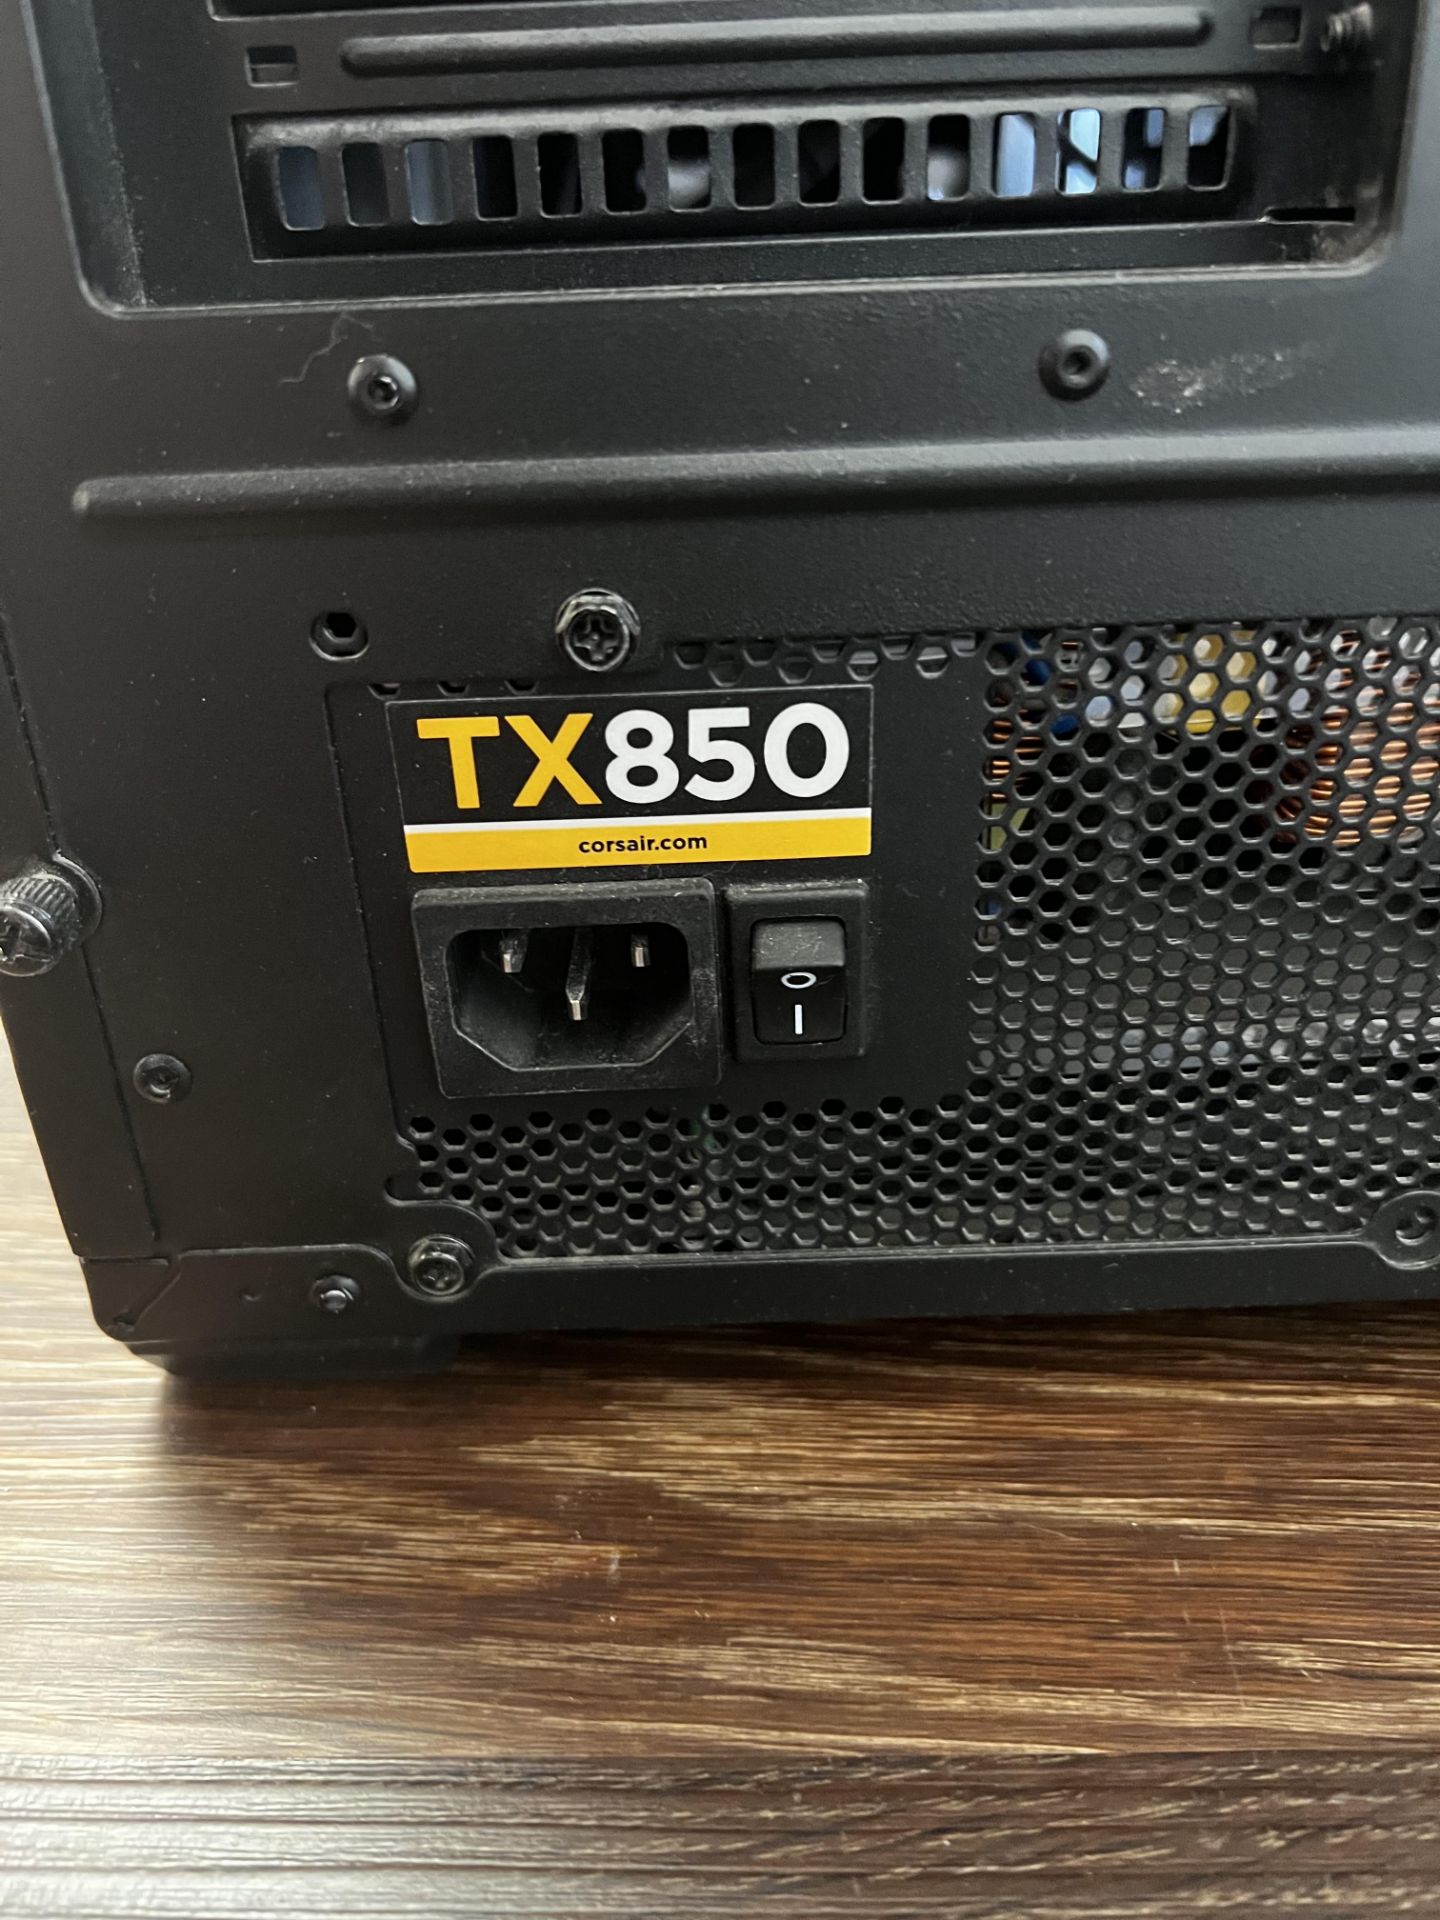 Cooler Master TX850 PC (No power lead included) - Image 6 of 7